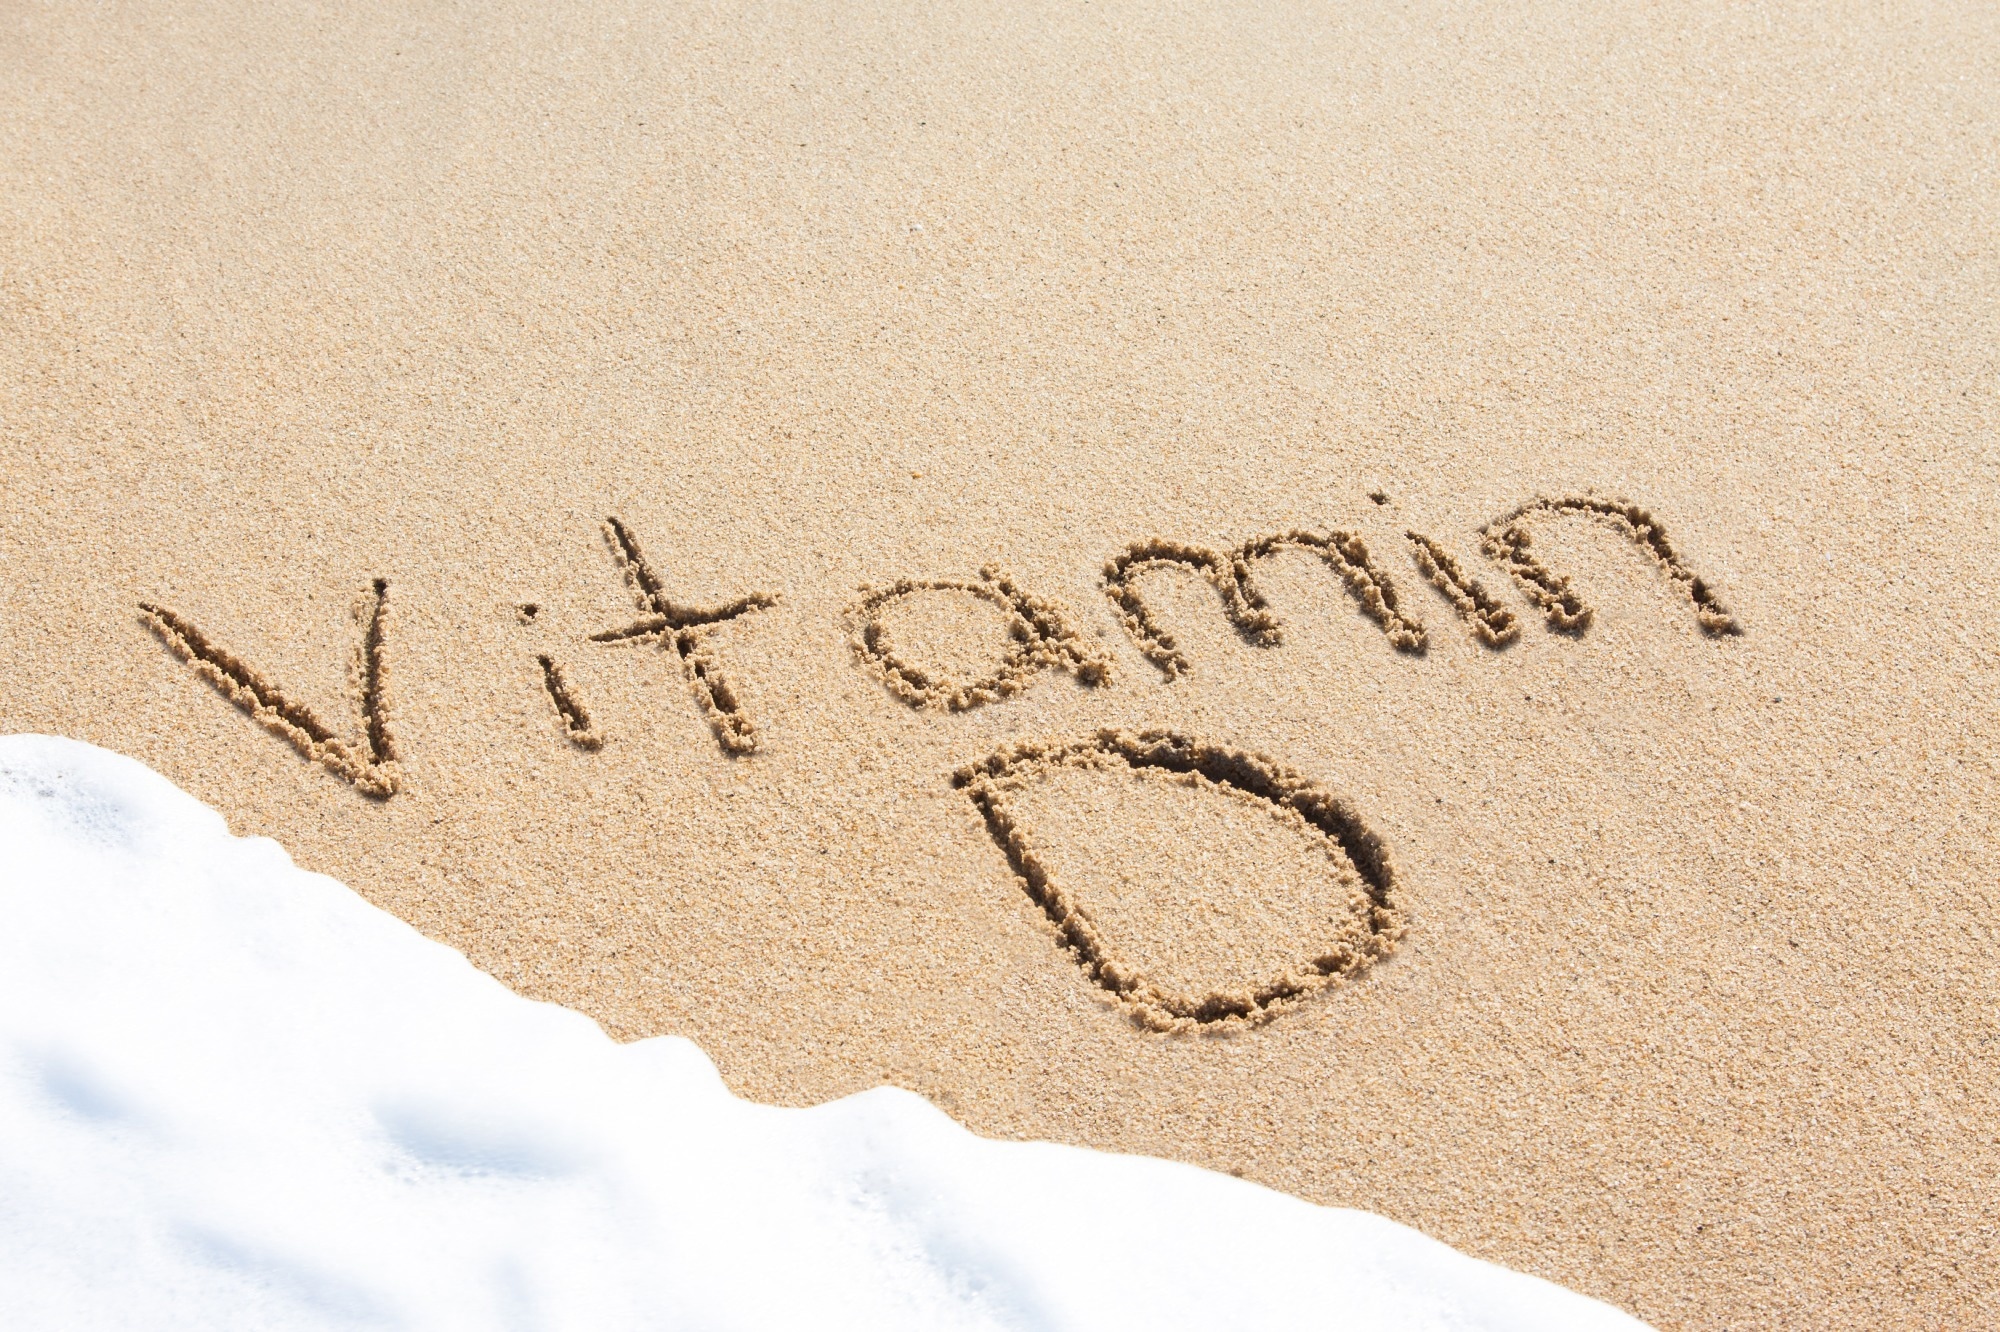 Study: The Impact of Vitamin D and Its Dietary Supplementation in Breast Cancer Prevention: An Integrative Review. Image Credit: Johan Larson/Shutterstock.com